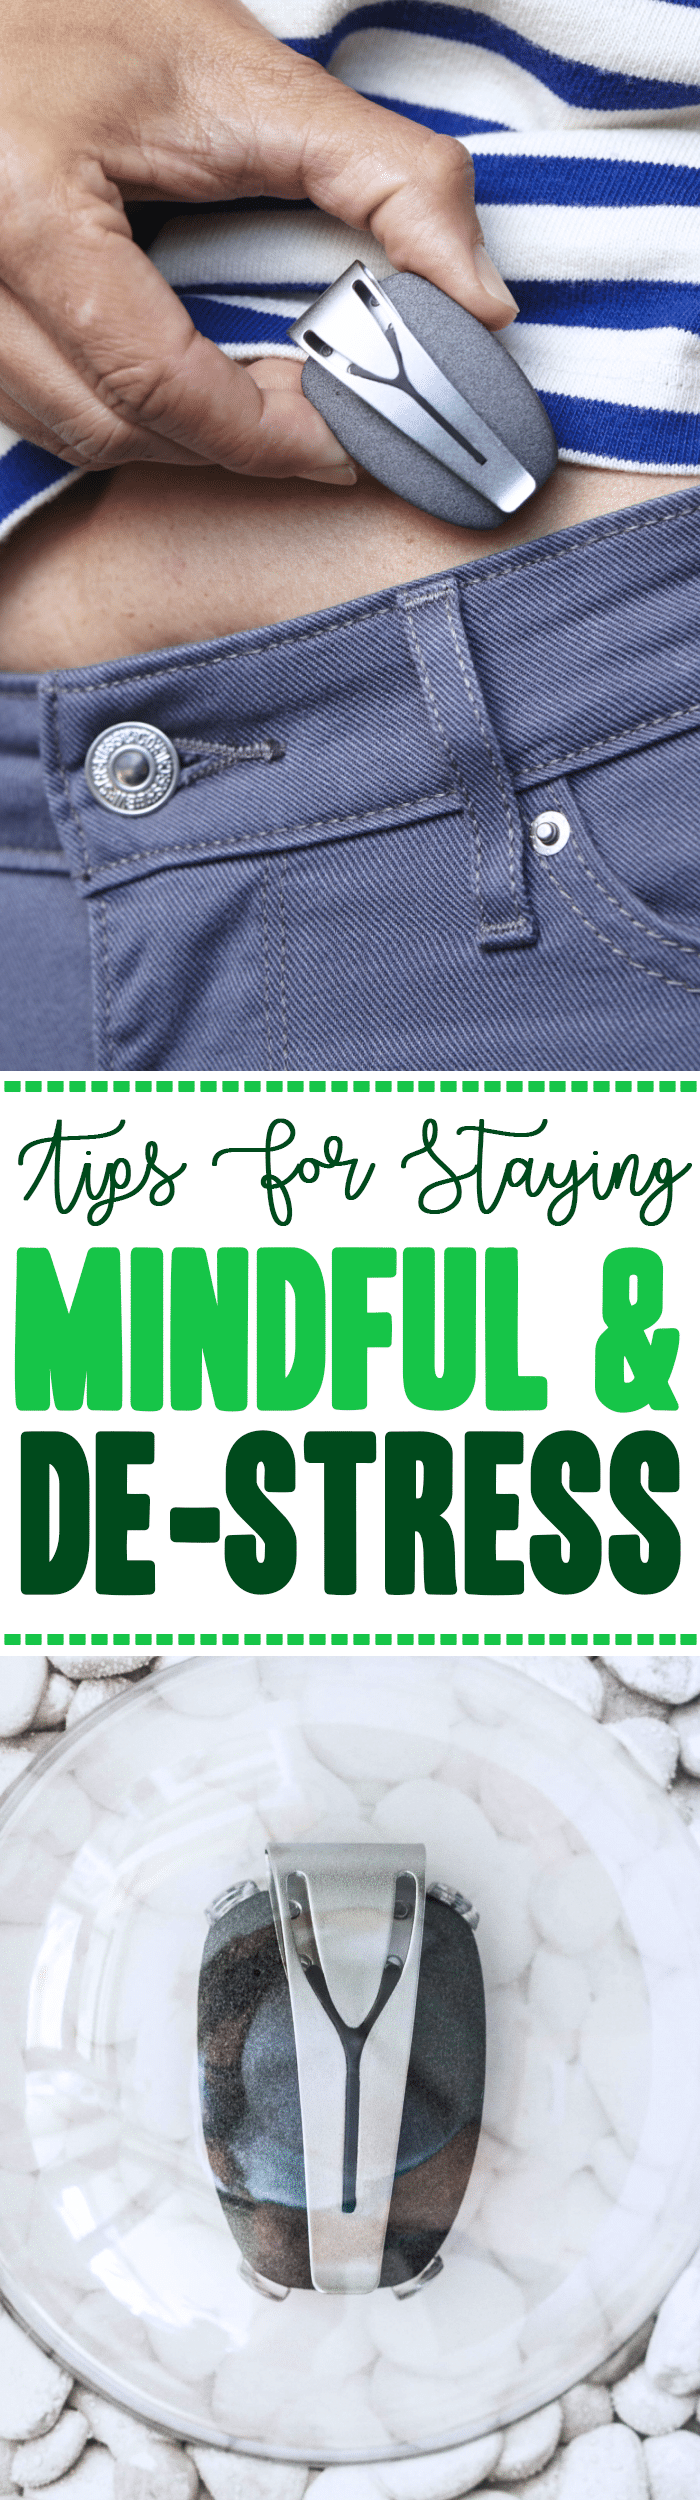 Tips-For-Staying-Mindful-and-De-stressing